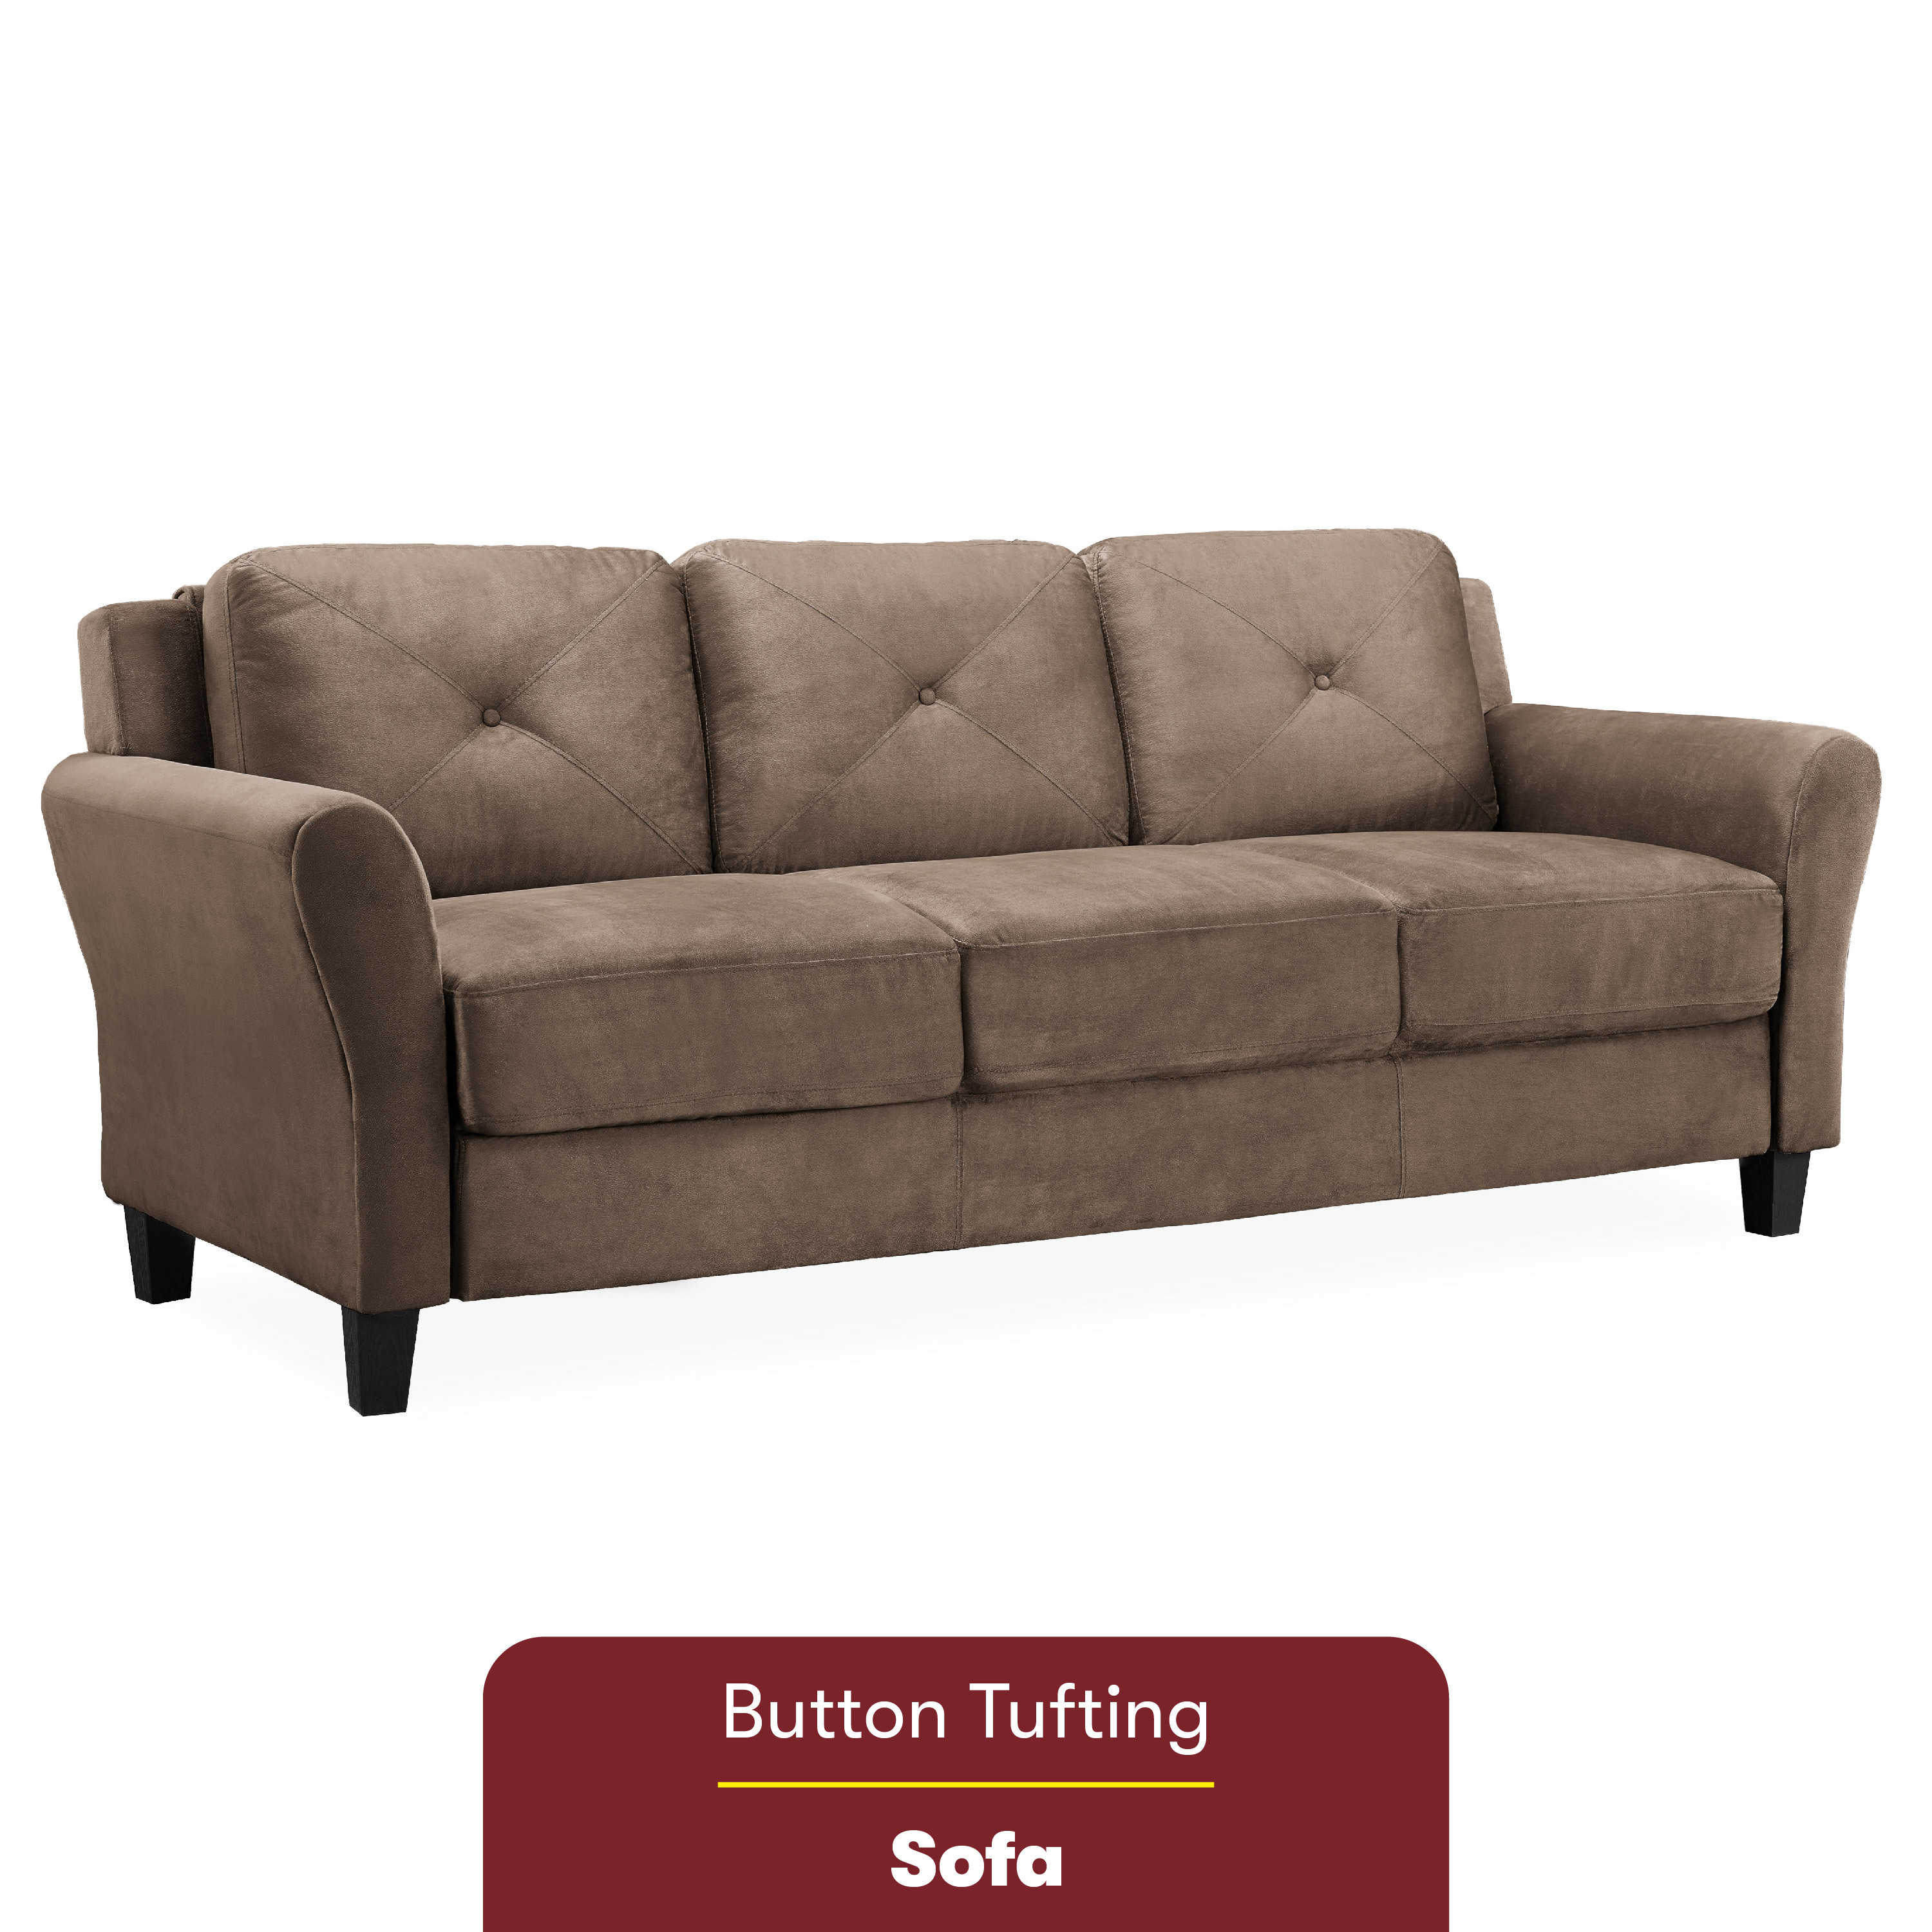 Lifestyle Solutions Taryn Traditional Sofa with Rolled Arms, Brown Fabric - image 2 of 12